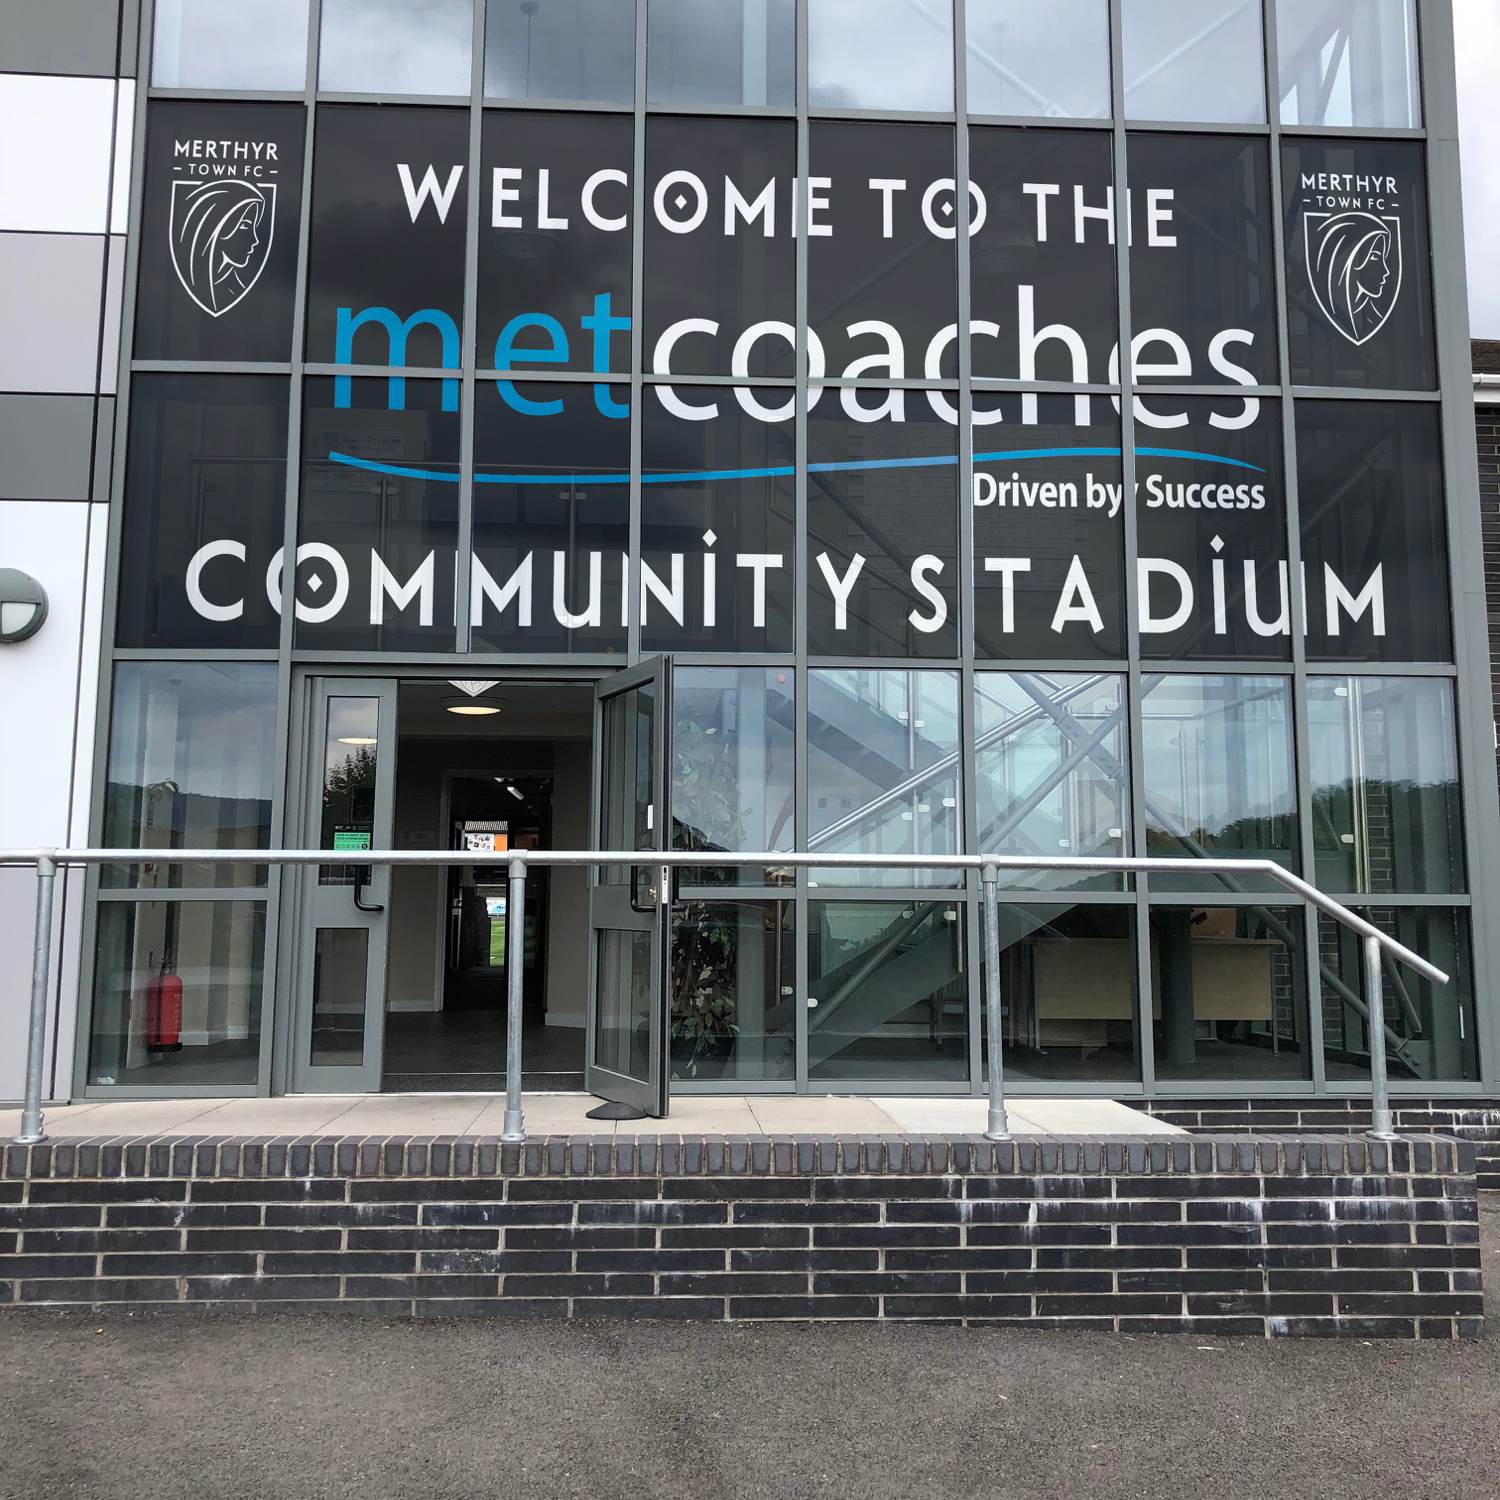 Merthyr Town FC's new building sponsored by MET Coaches